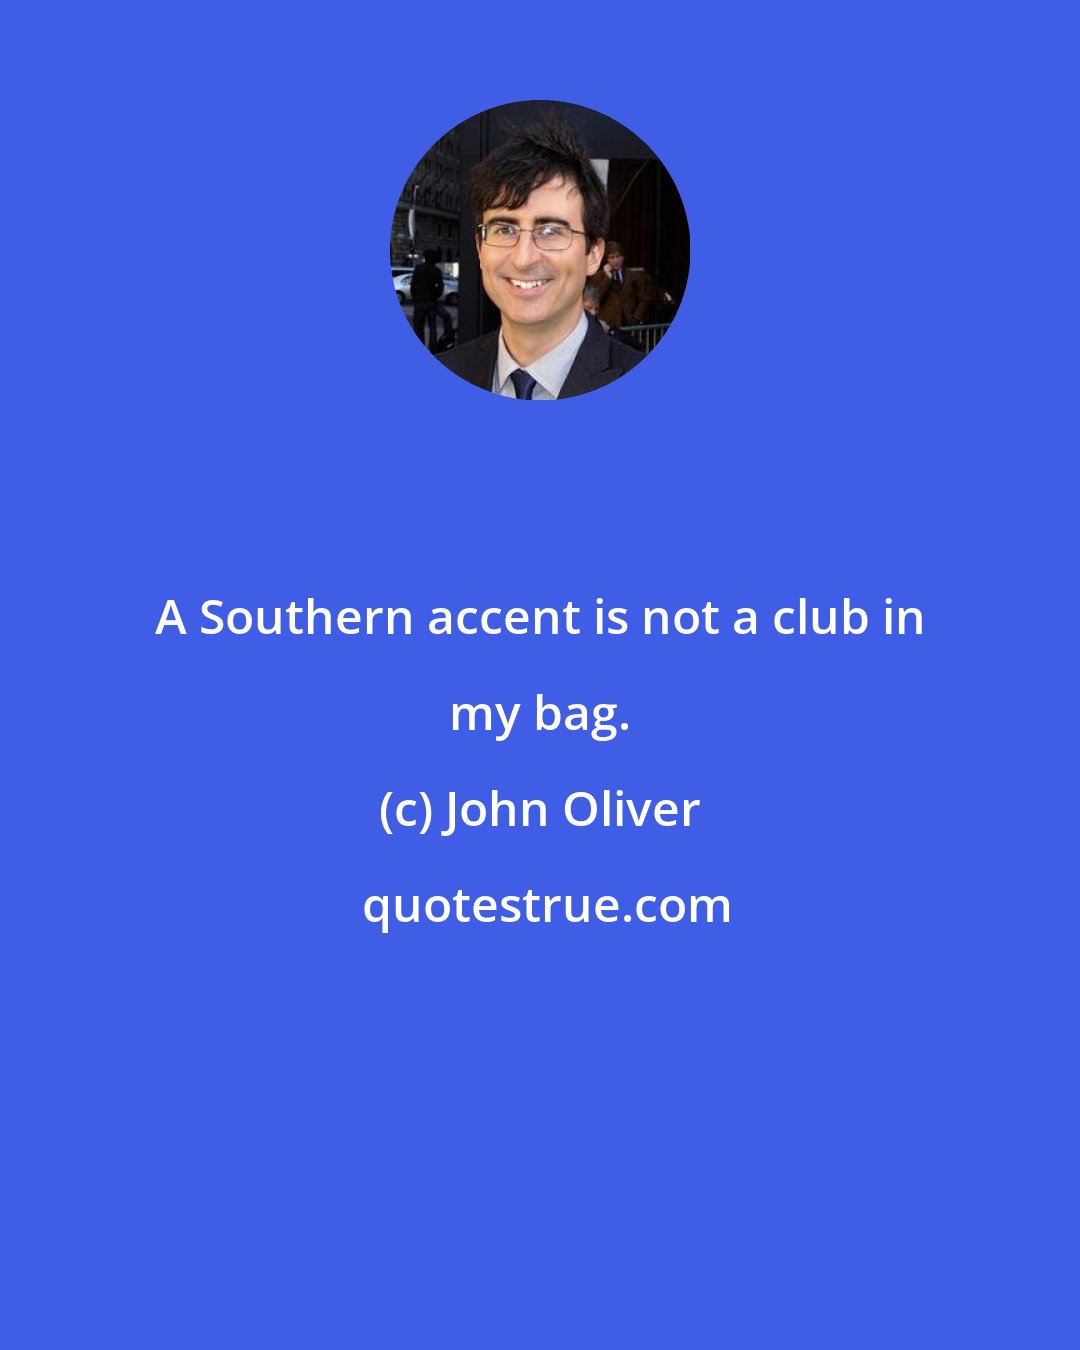 John Oliver: A Southern accent is not a club in my bag.